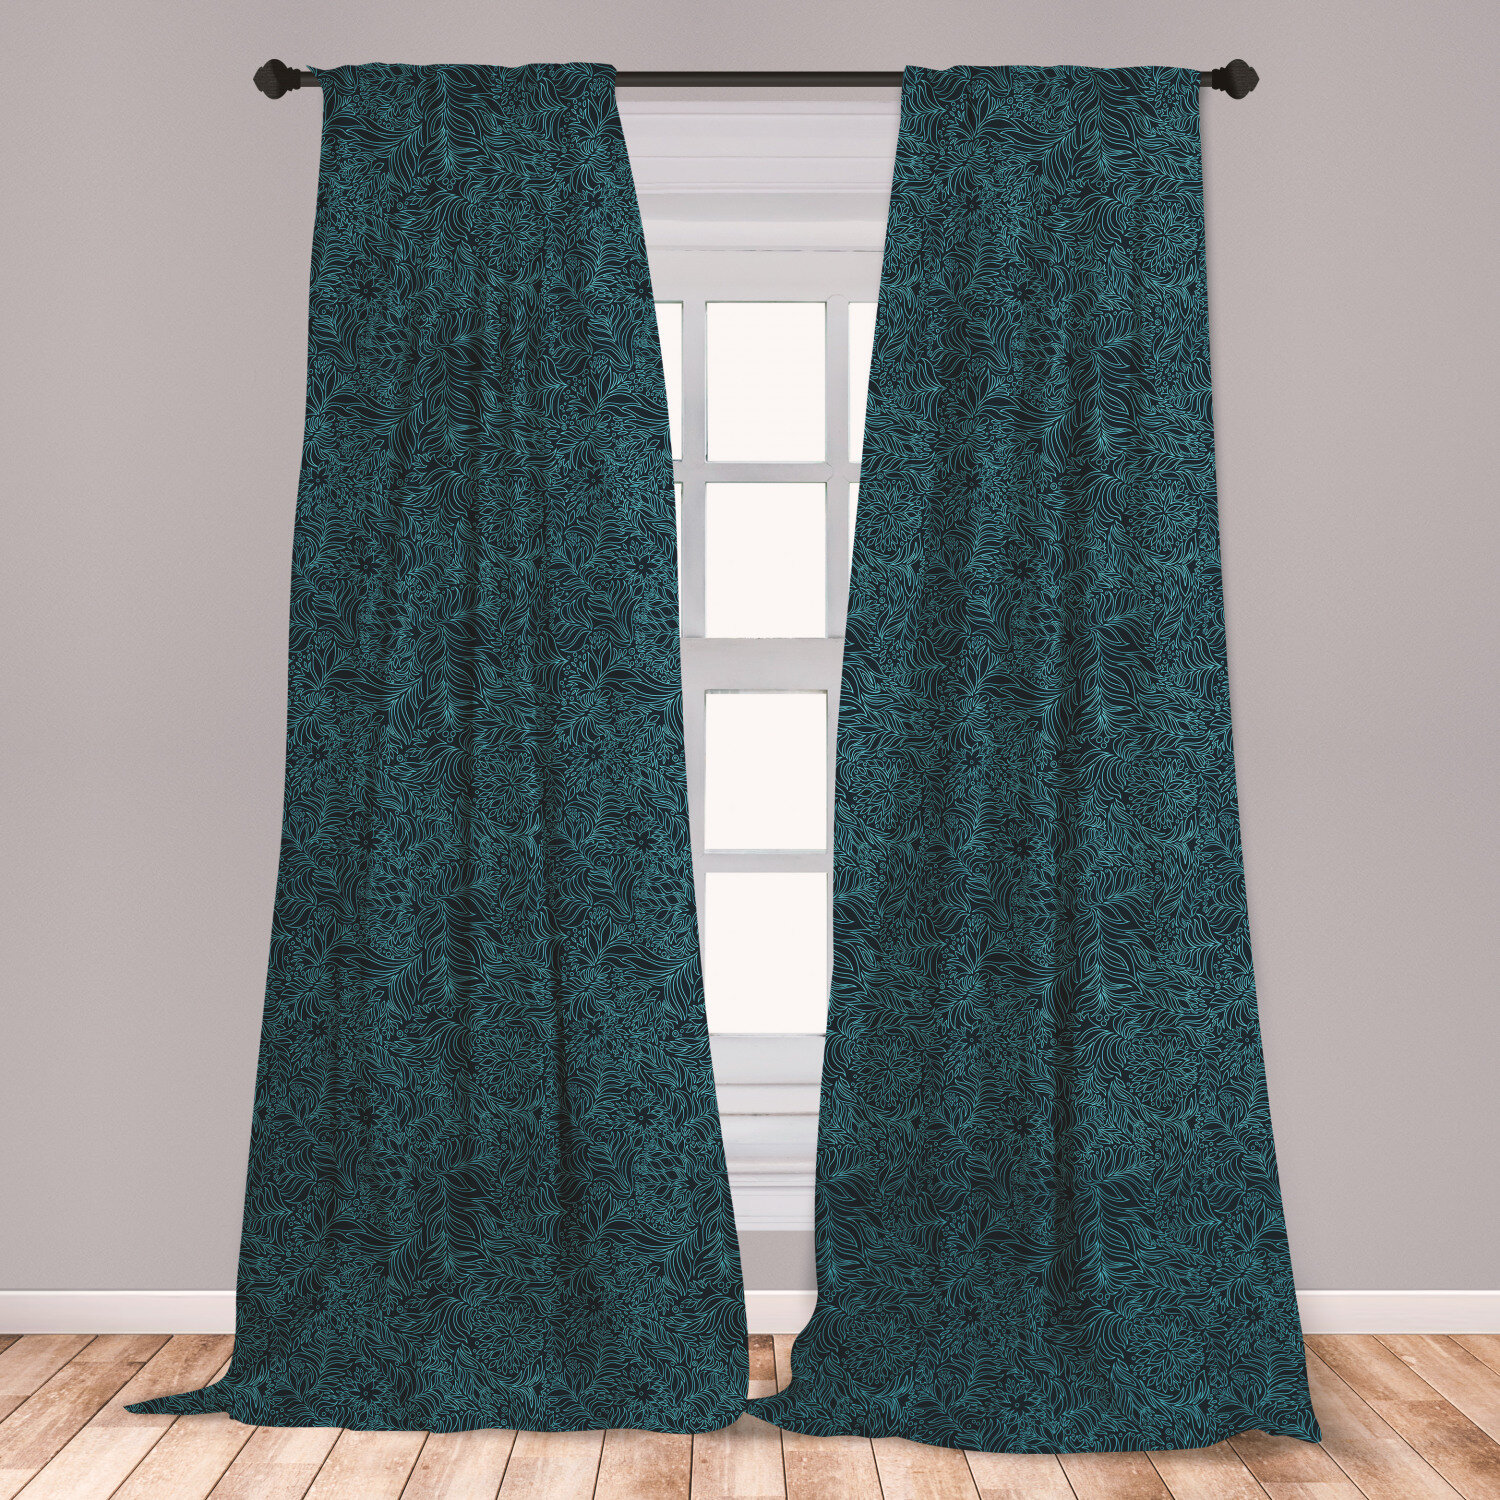 East Urban Home Ambesonne Navy And Teal Curtains